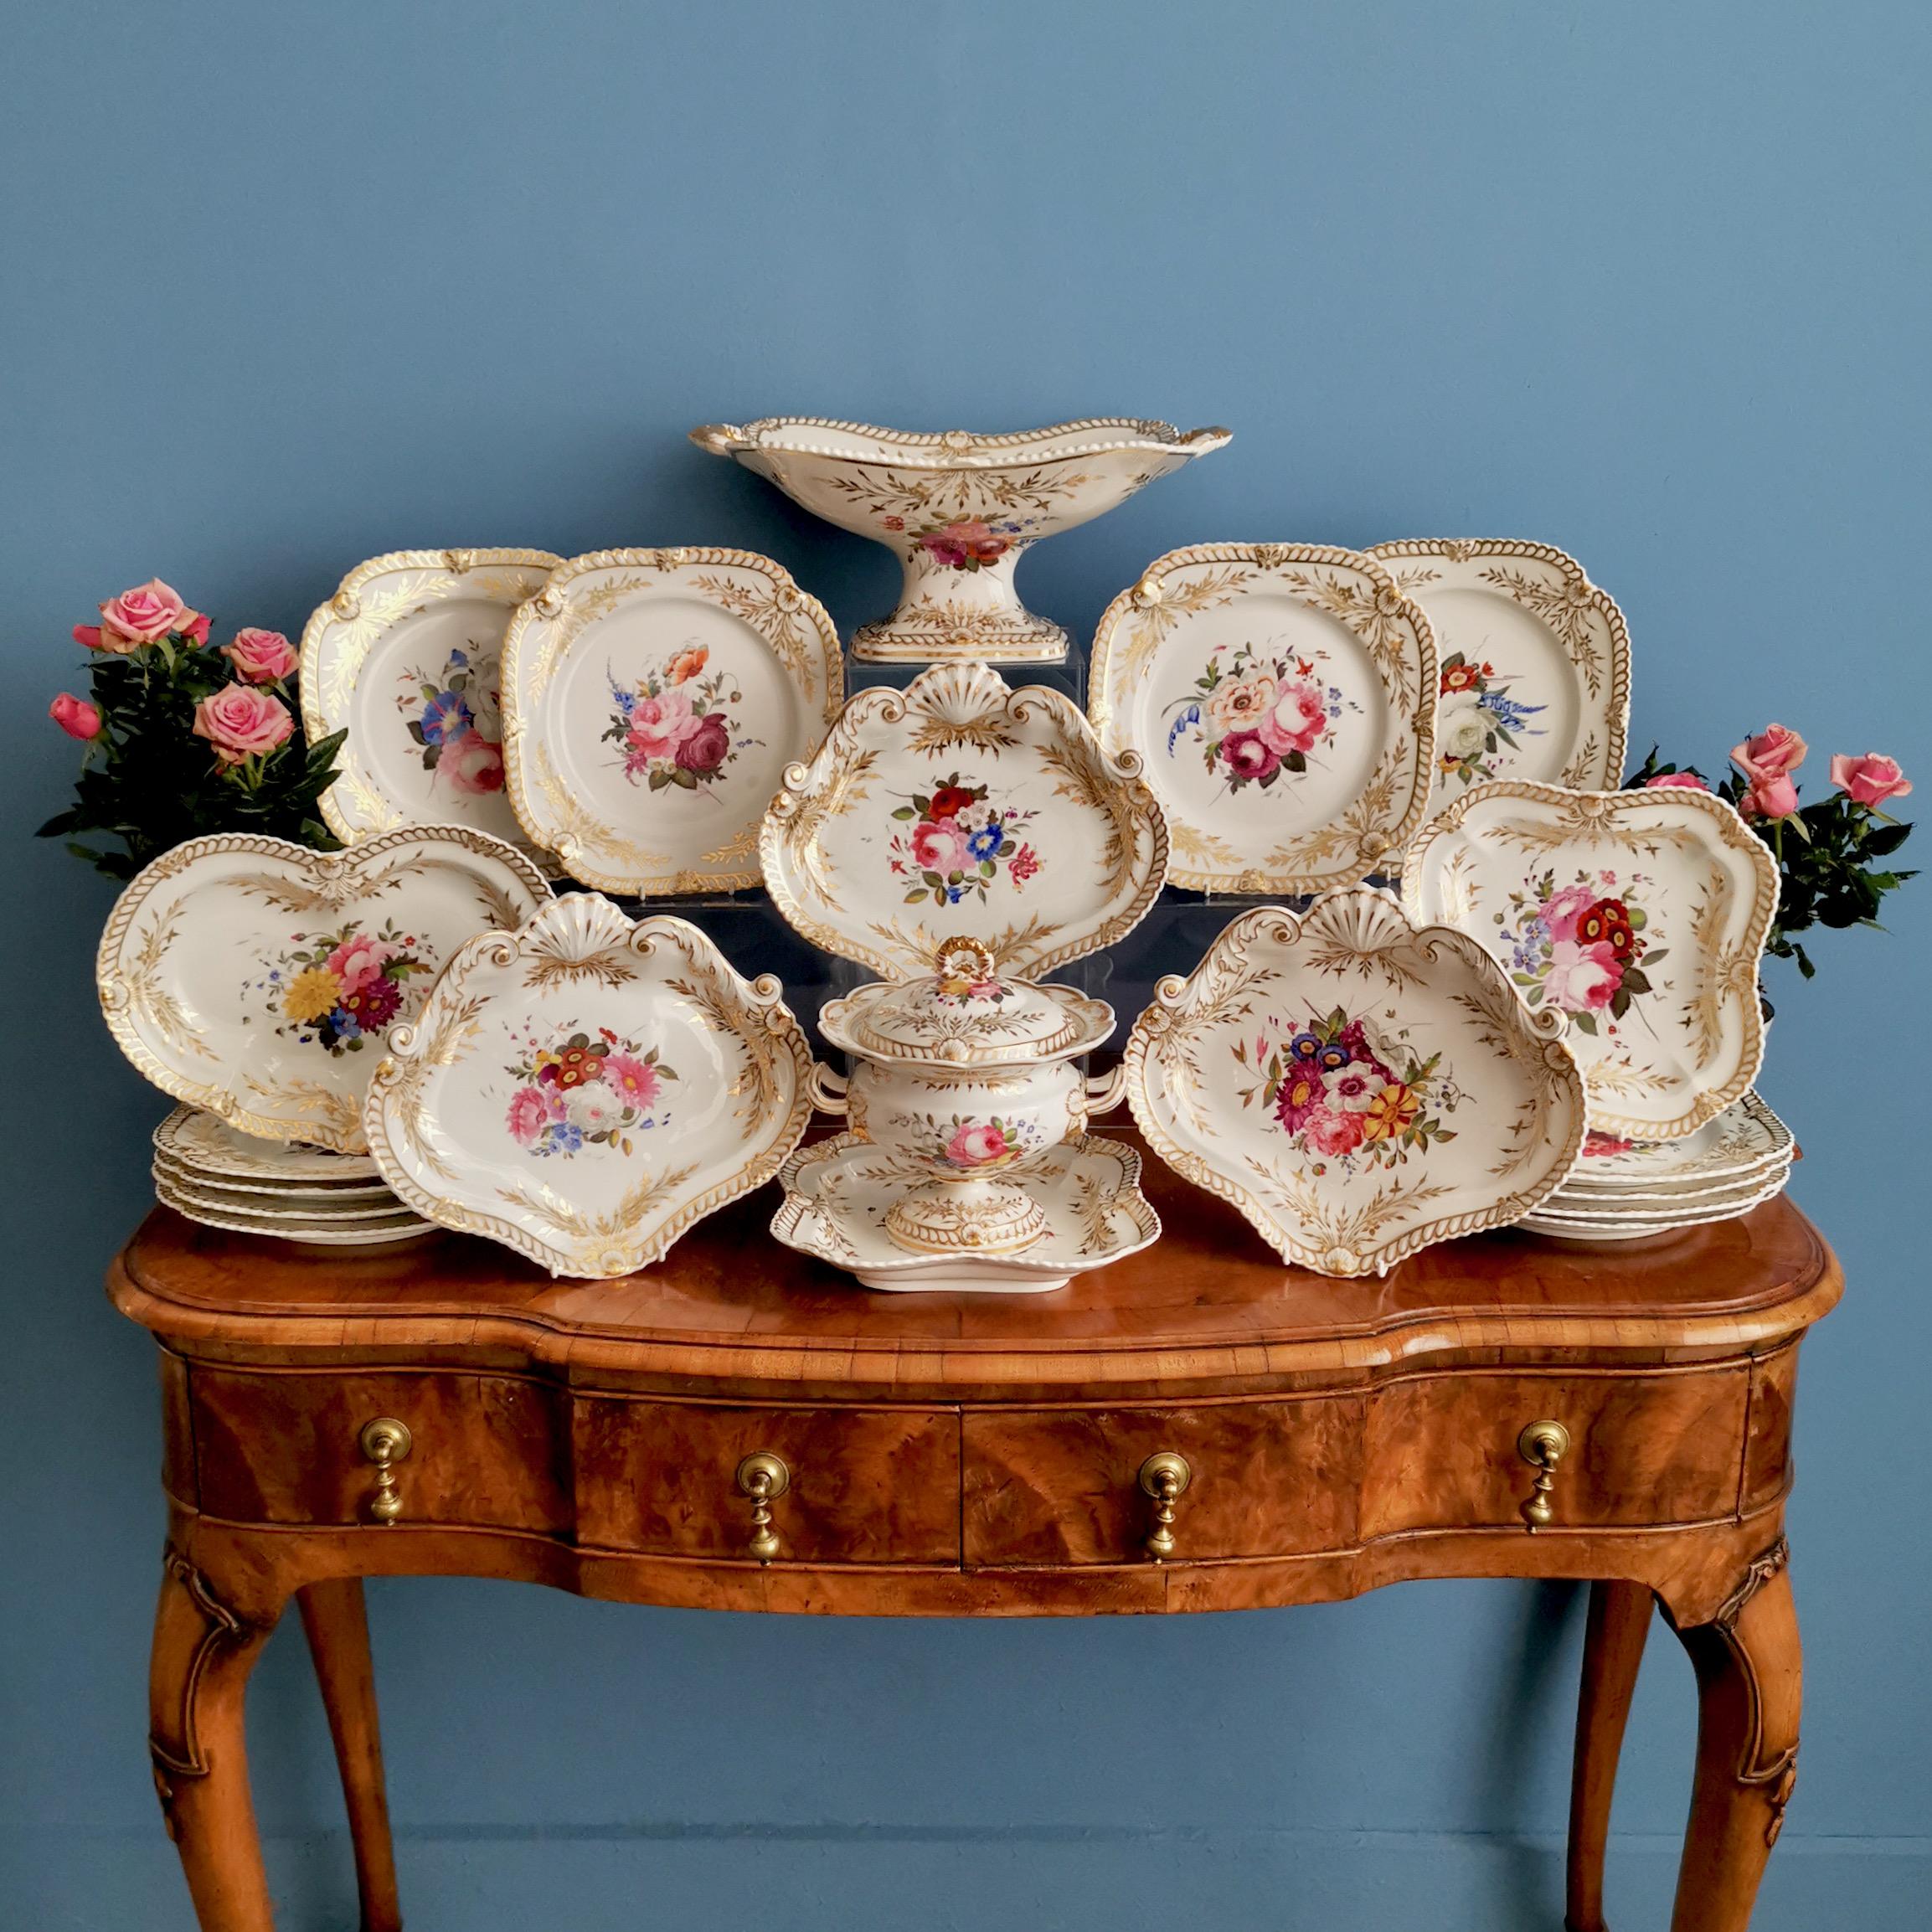 This is a spectacular and rare dessert service made by Chamberlains Worcester in about 1822. The service consists of a high comport, 2 square dishes, 1 kidney shaped dish, 3 shell dishes, one sauce comport with cover, and twelve square plates.

The